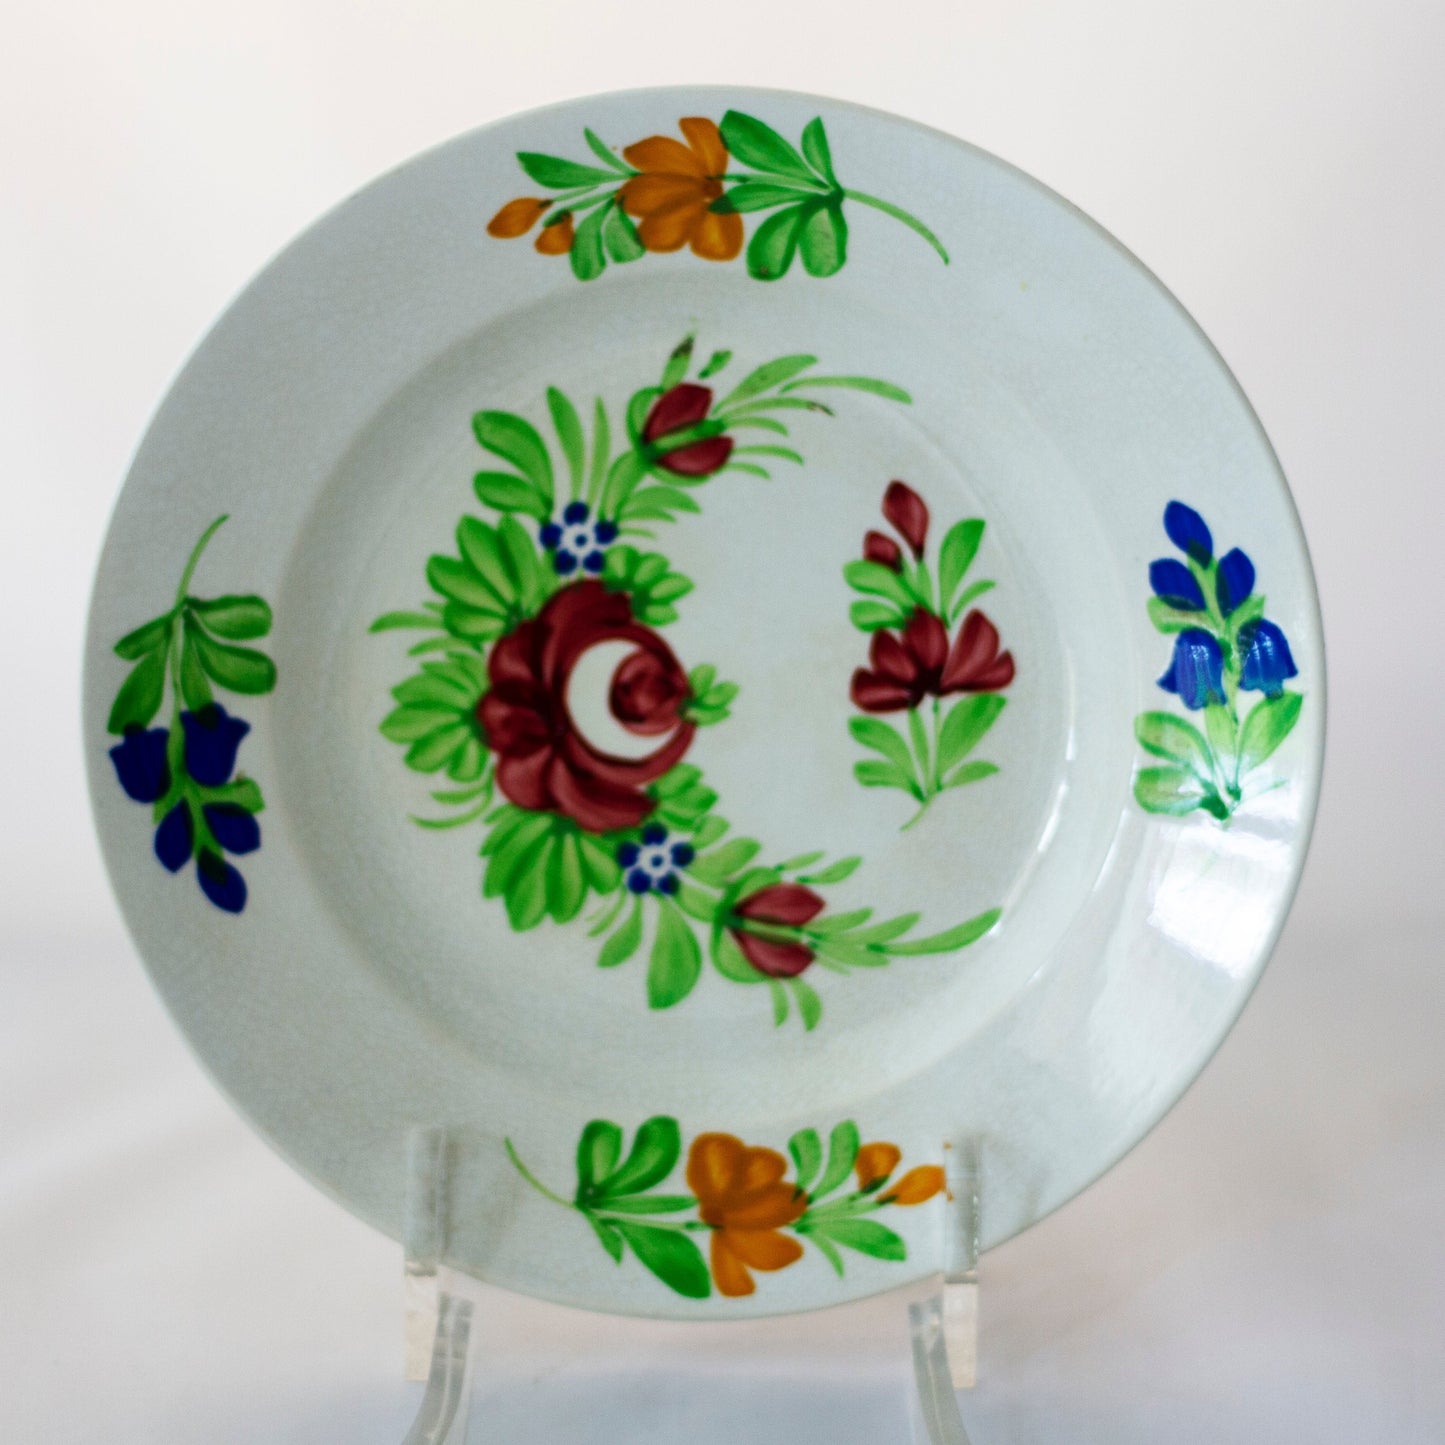 Antique GAUDY STYLE STICK SPATTER Hand Painted Plate by Villeroy & Boch Circa 1874 to 1909